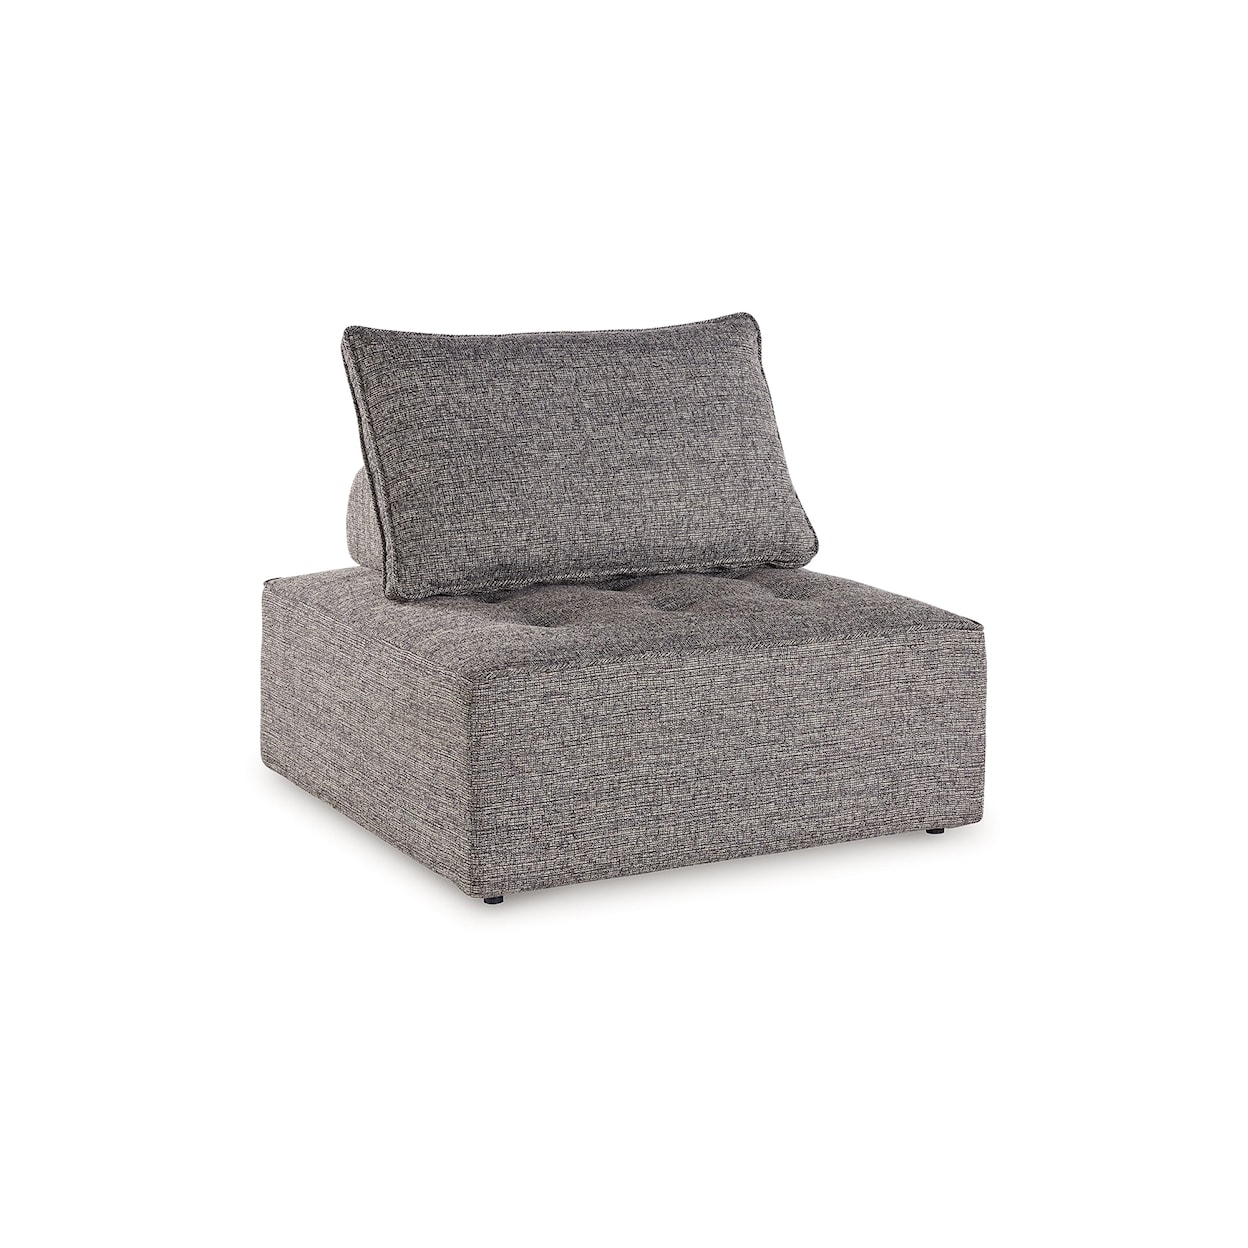 Signature Bree Zee Outdoor Lounge Chair w/Cushion